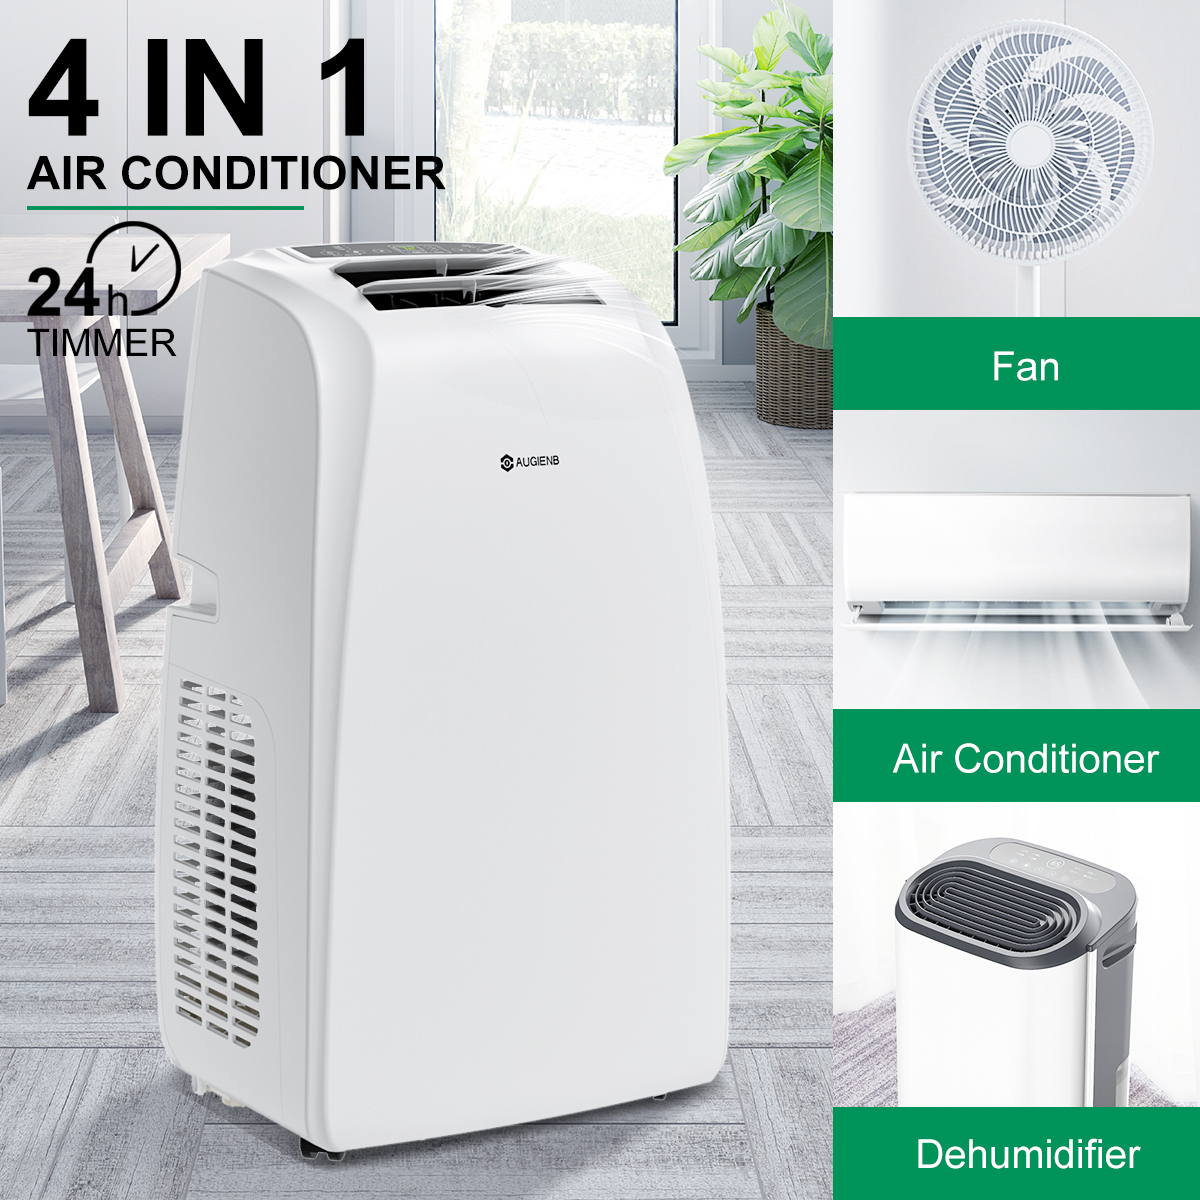 AUGIENB 14000 BTU Portable Air Conditioner,Evaporative Air Cooler ,Dehumidifier Cooling Fan 24-Hour Timer,Cooling Up to 500 Sq, W/ Remote Control &Window Kit - image 4 of 10